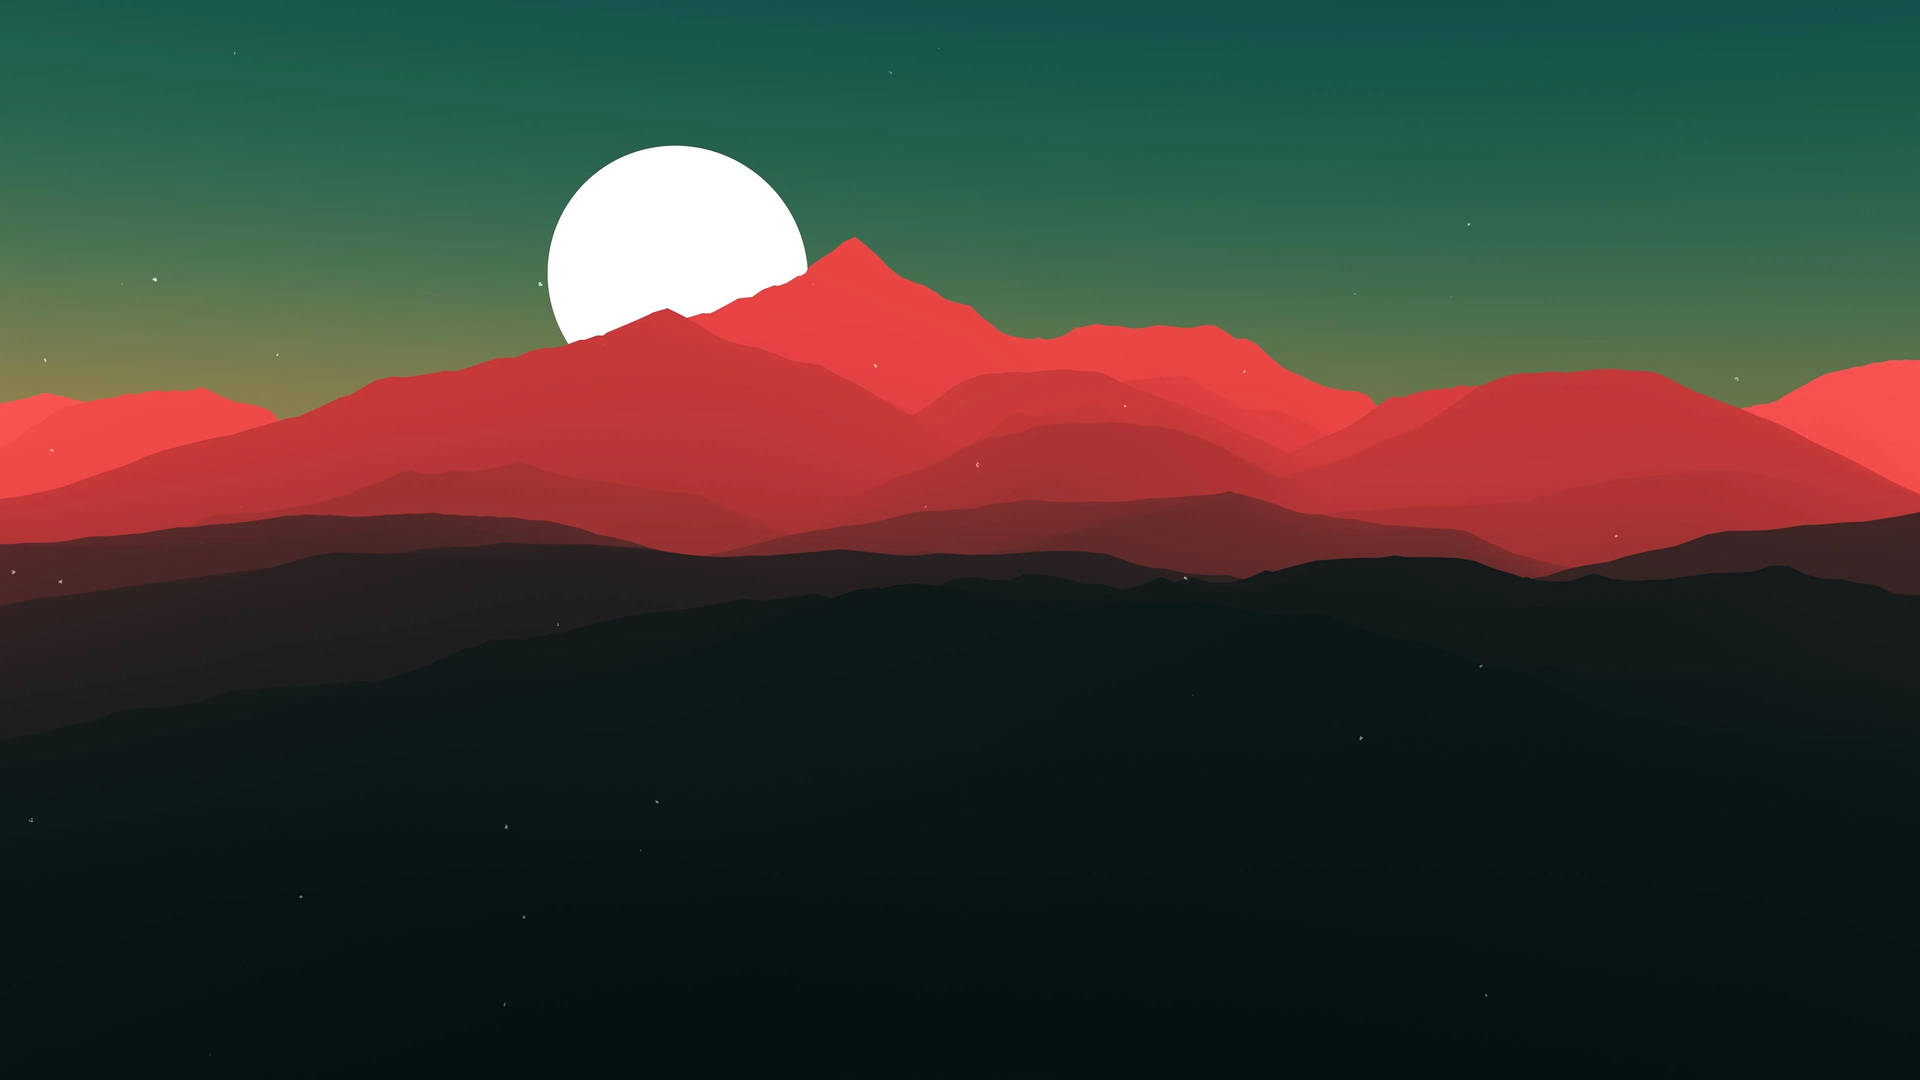 Graphic 4k Flat Art Full Moon And Red Mountain Wallpaper